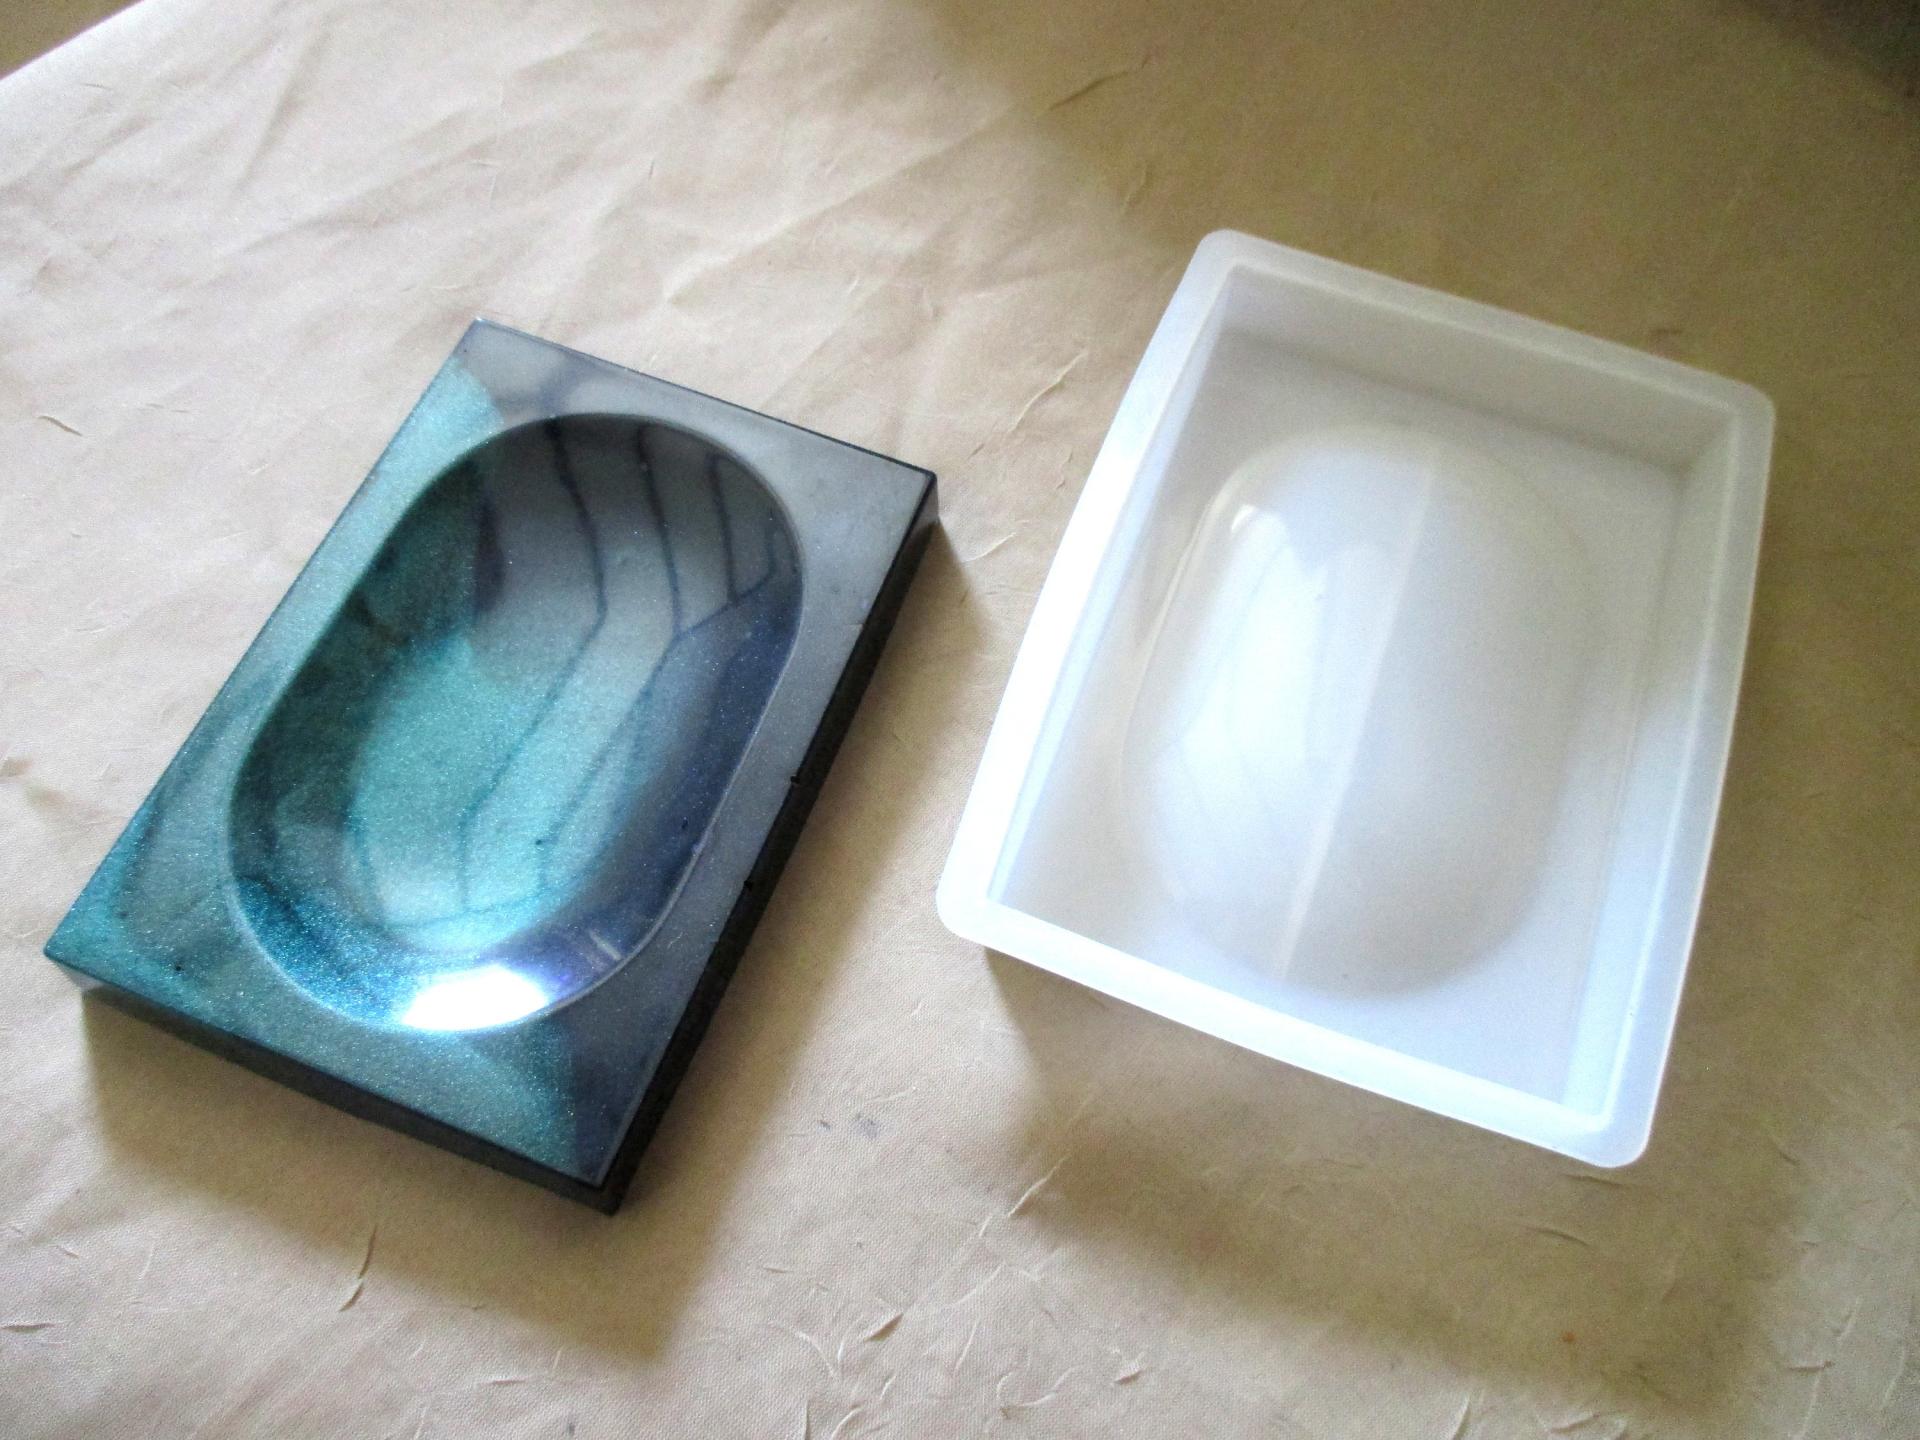 Mold - Soap Dish Casting Mold - for Epoxy, Clay or other casting medium